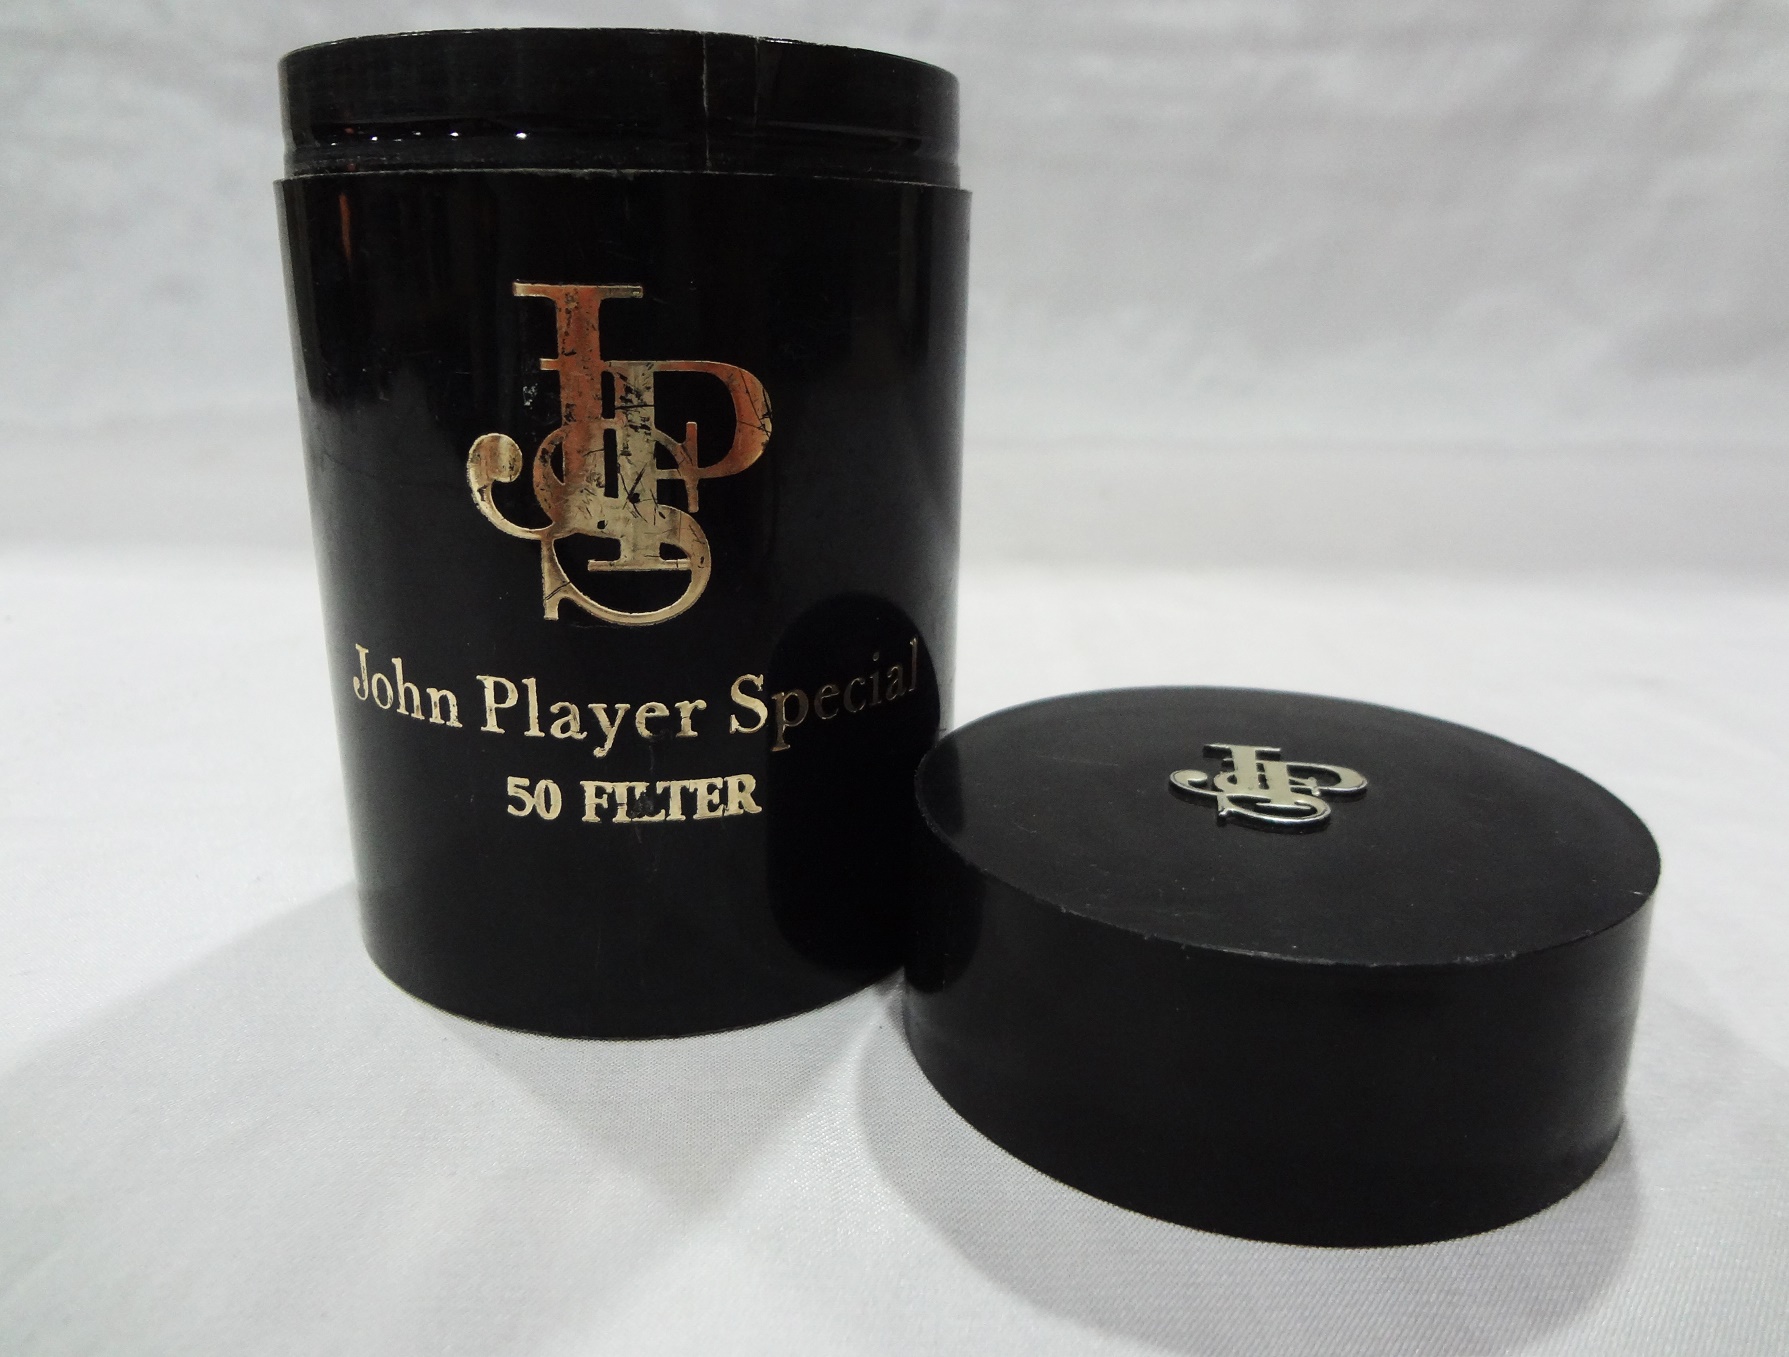 John Player Special Plastic Cigarette Cylinder/collectible 